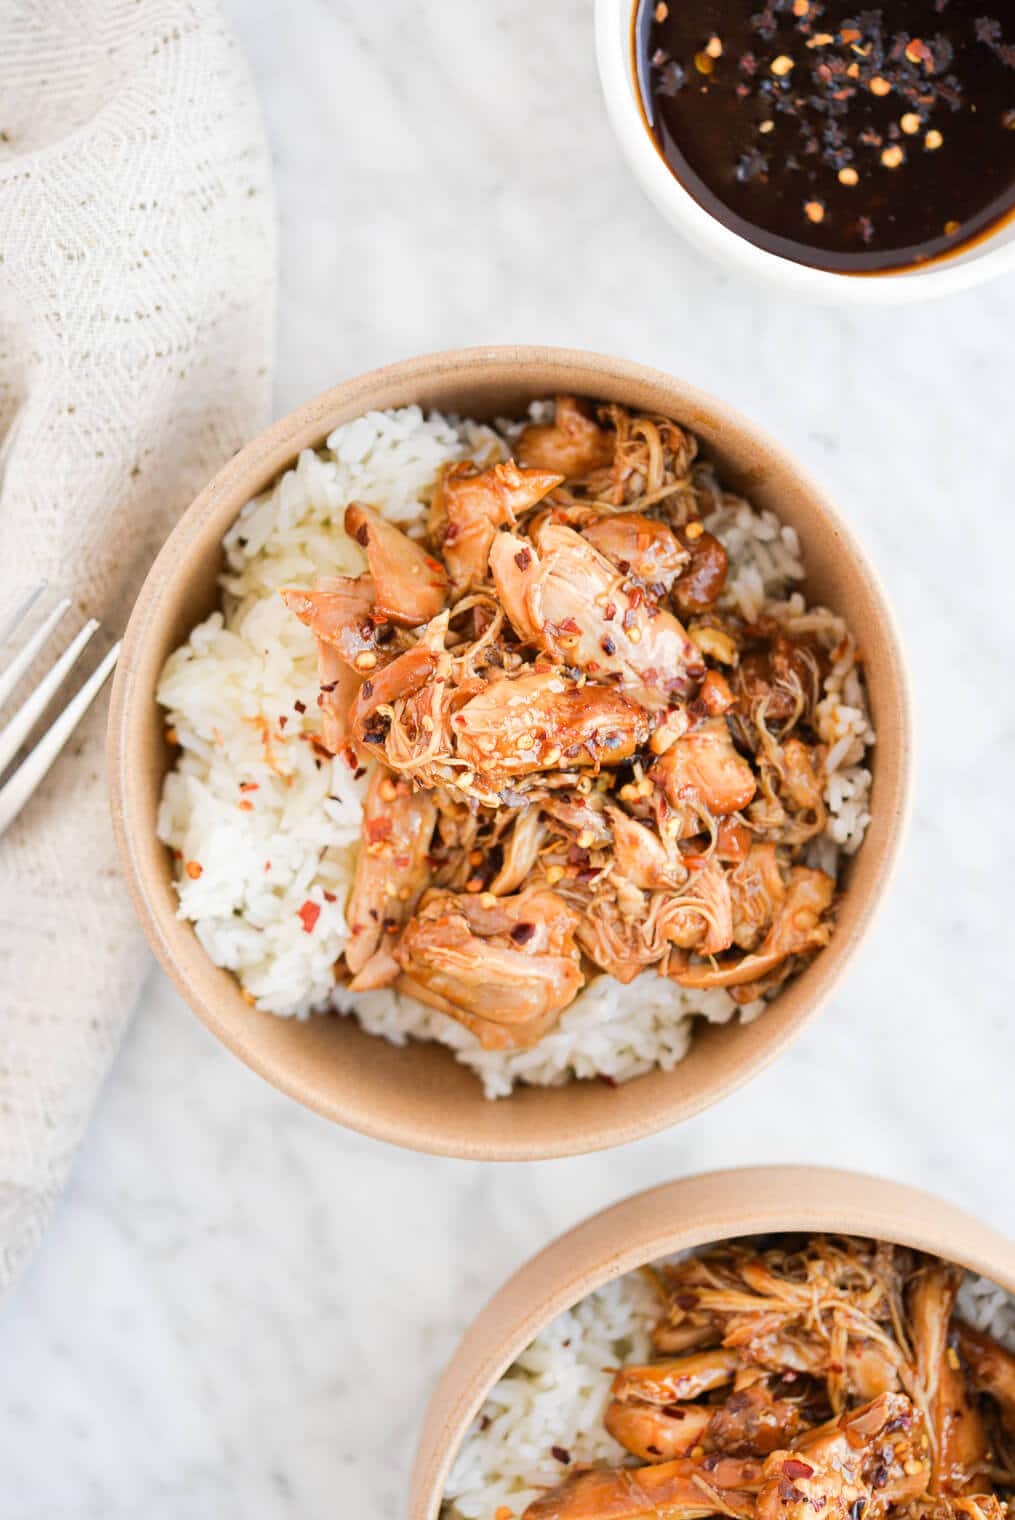 a beige bowl filled with white rice and shredded instant pot bourbon chicken with red pepper flakes on top on a marble surface with a linen napkin beside it